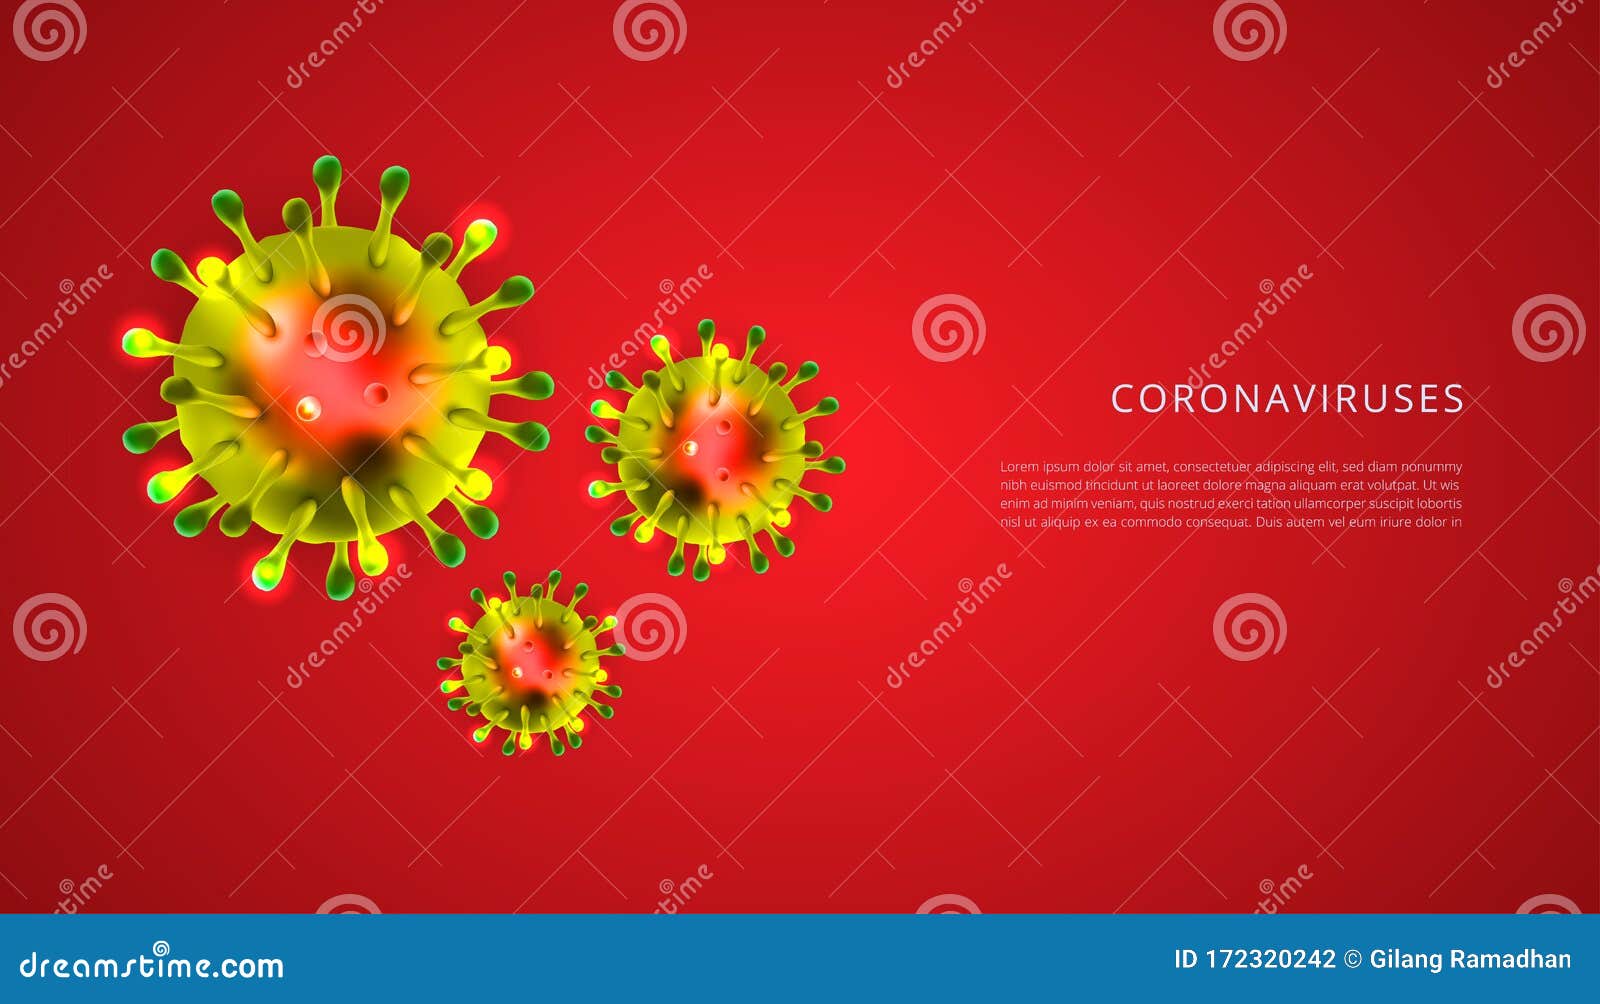 Group of Corona Virus 3d Realistic Vector in Red Background. Coronaviruses  Cell, Wuhan Virus Disease Stock Vector - Illustration of microbiology,  diagnosis: 172320242